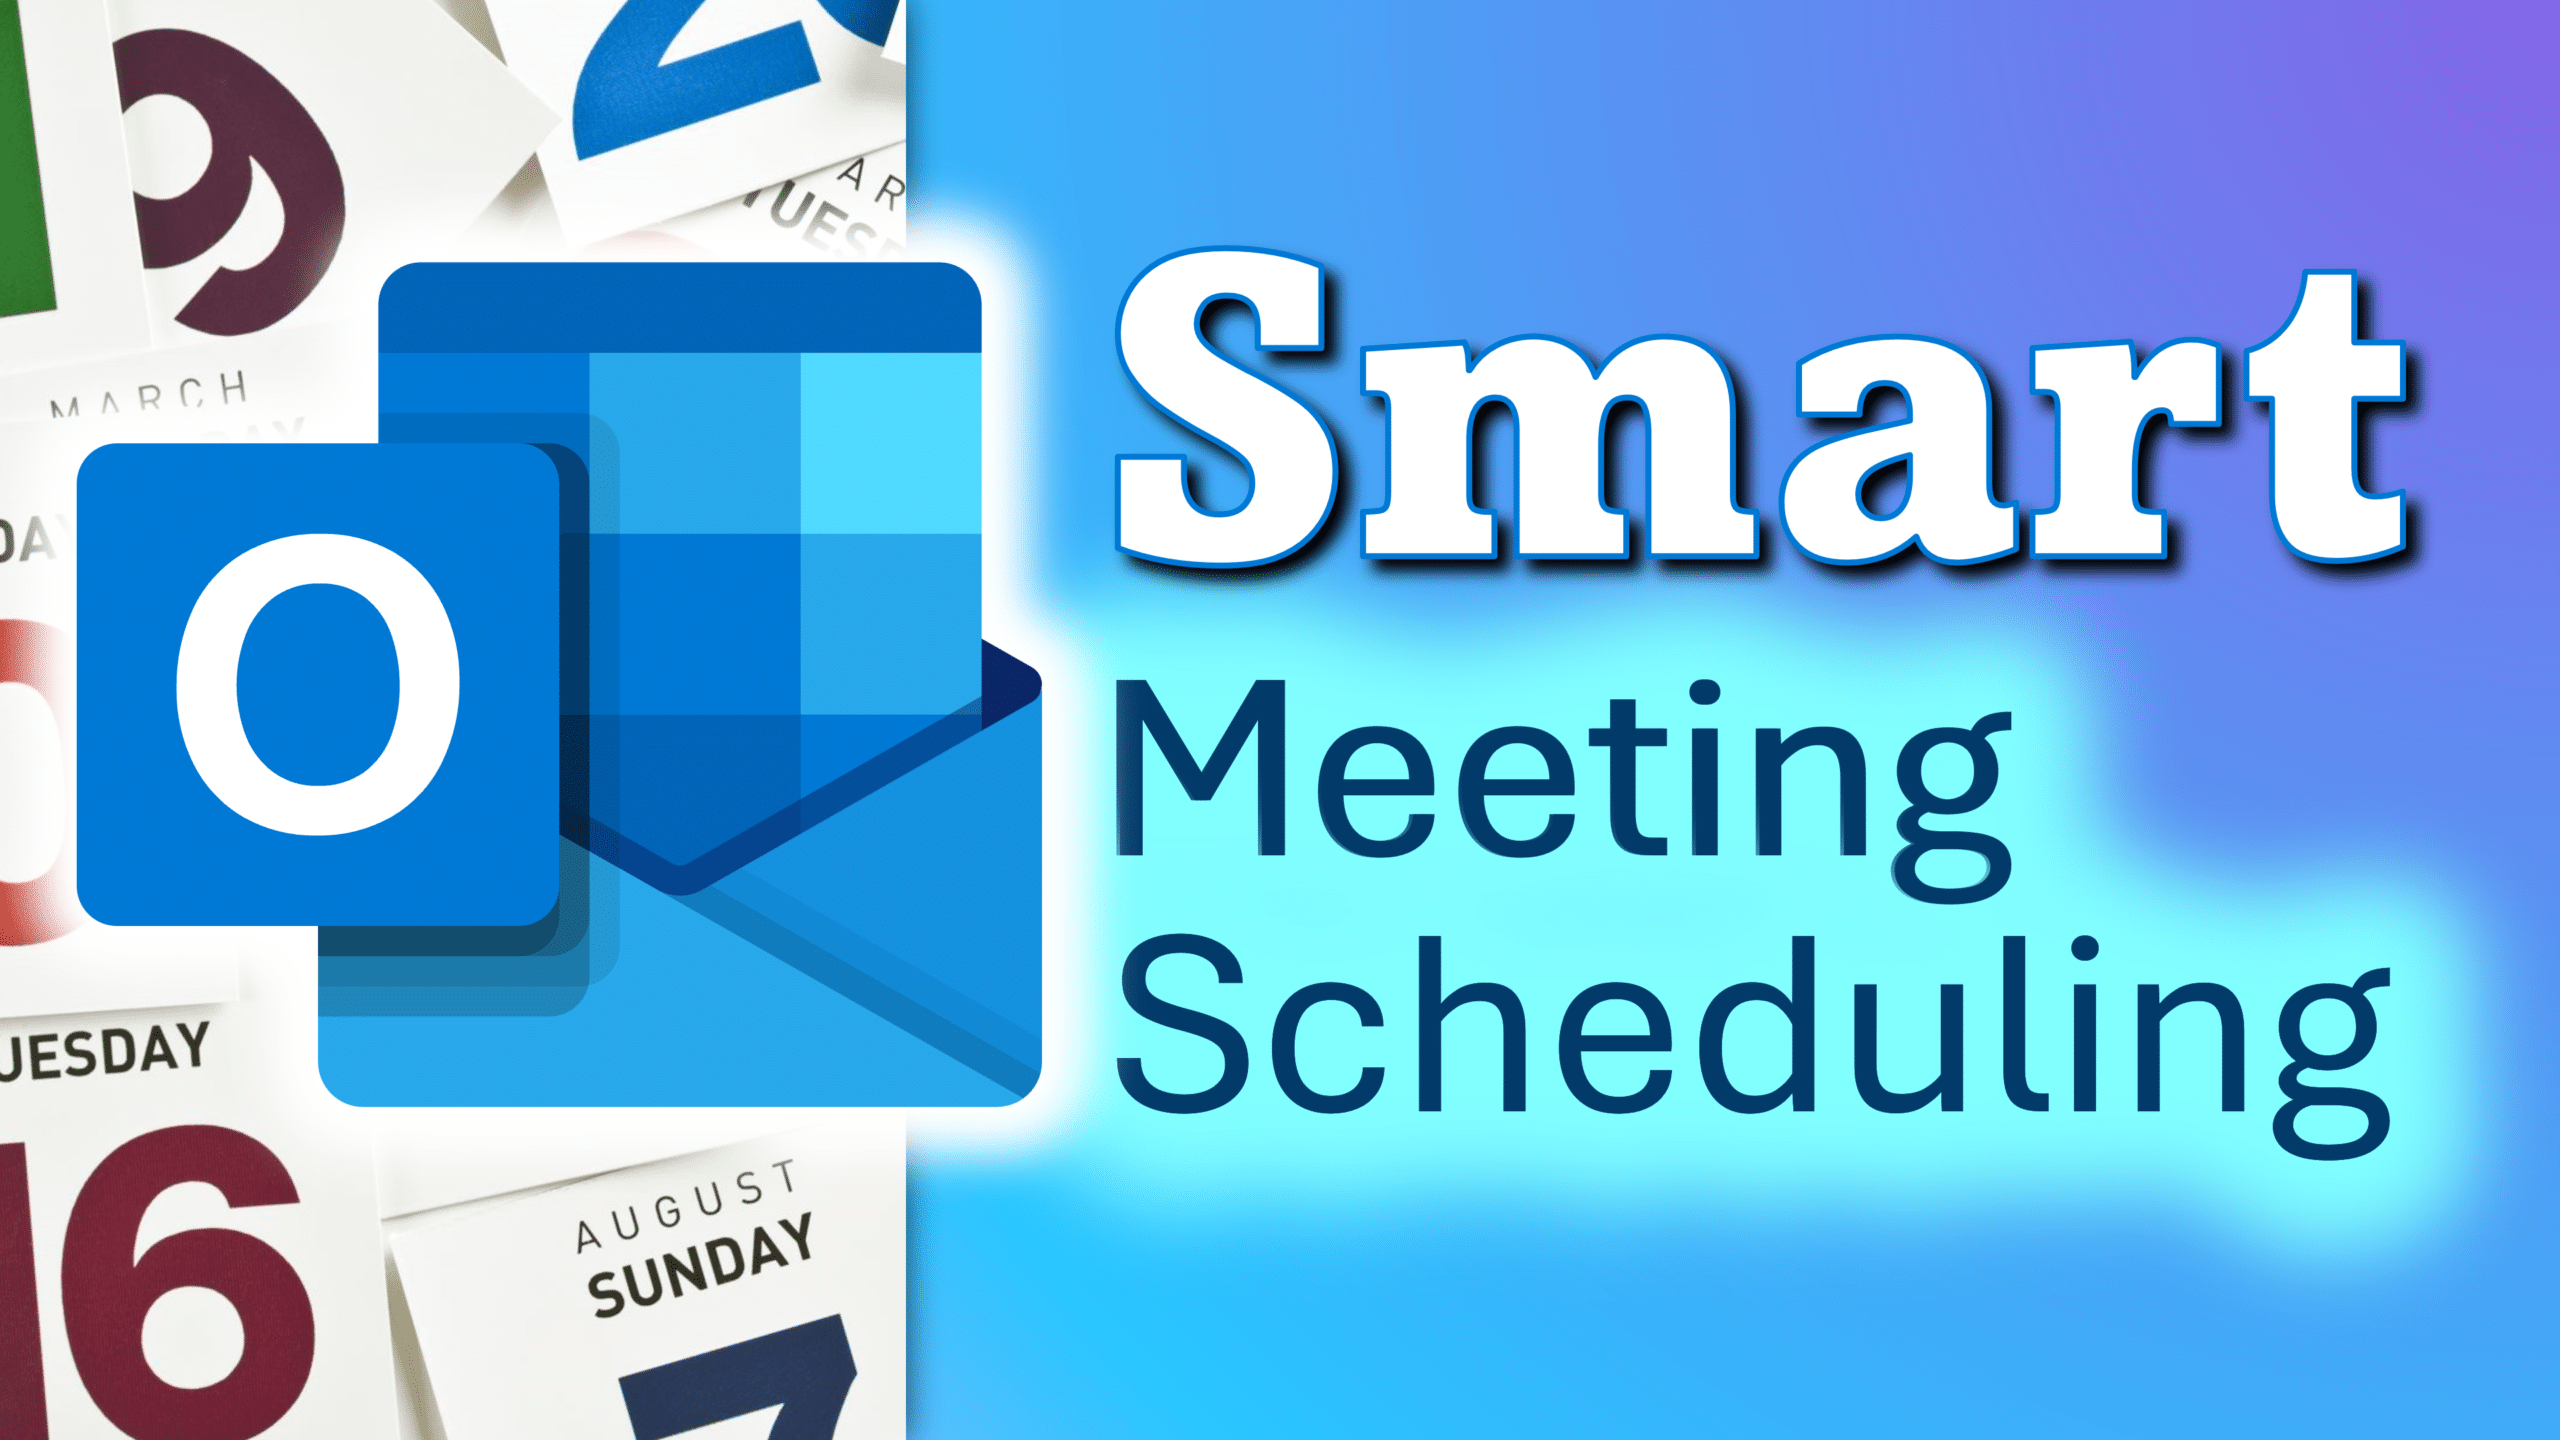 Smart Meeting Scheduling with Scheduling Poll in Outlook